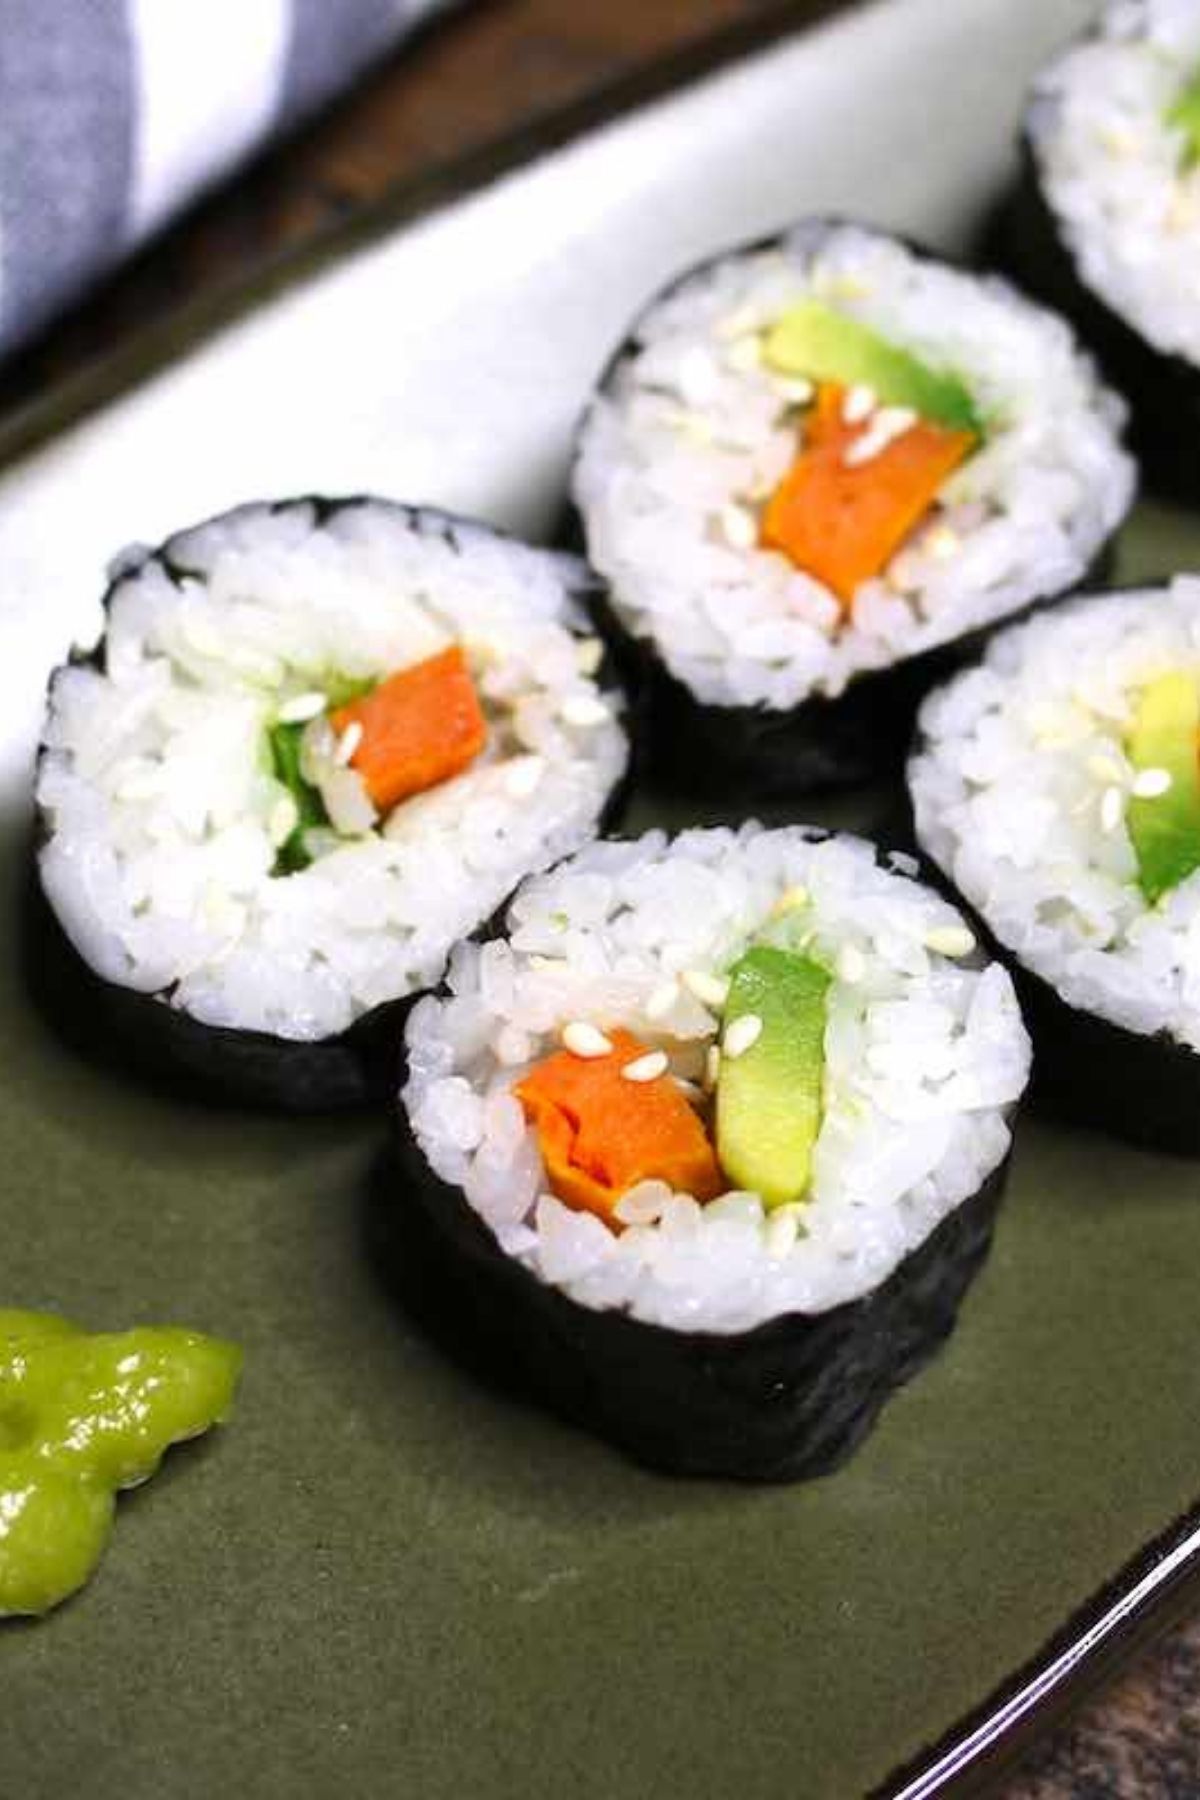 Considered to be one of the most popular kinds of food in the U.S., sushi has gone from exotic to mainstream over the years. From high-end Japanese restaurants to the food court at the mall, getting your sushi fix is easier than ever. 